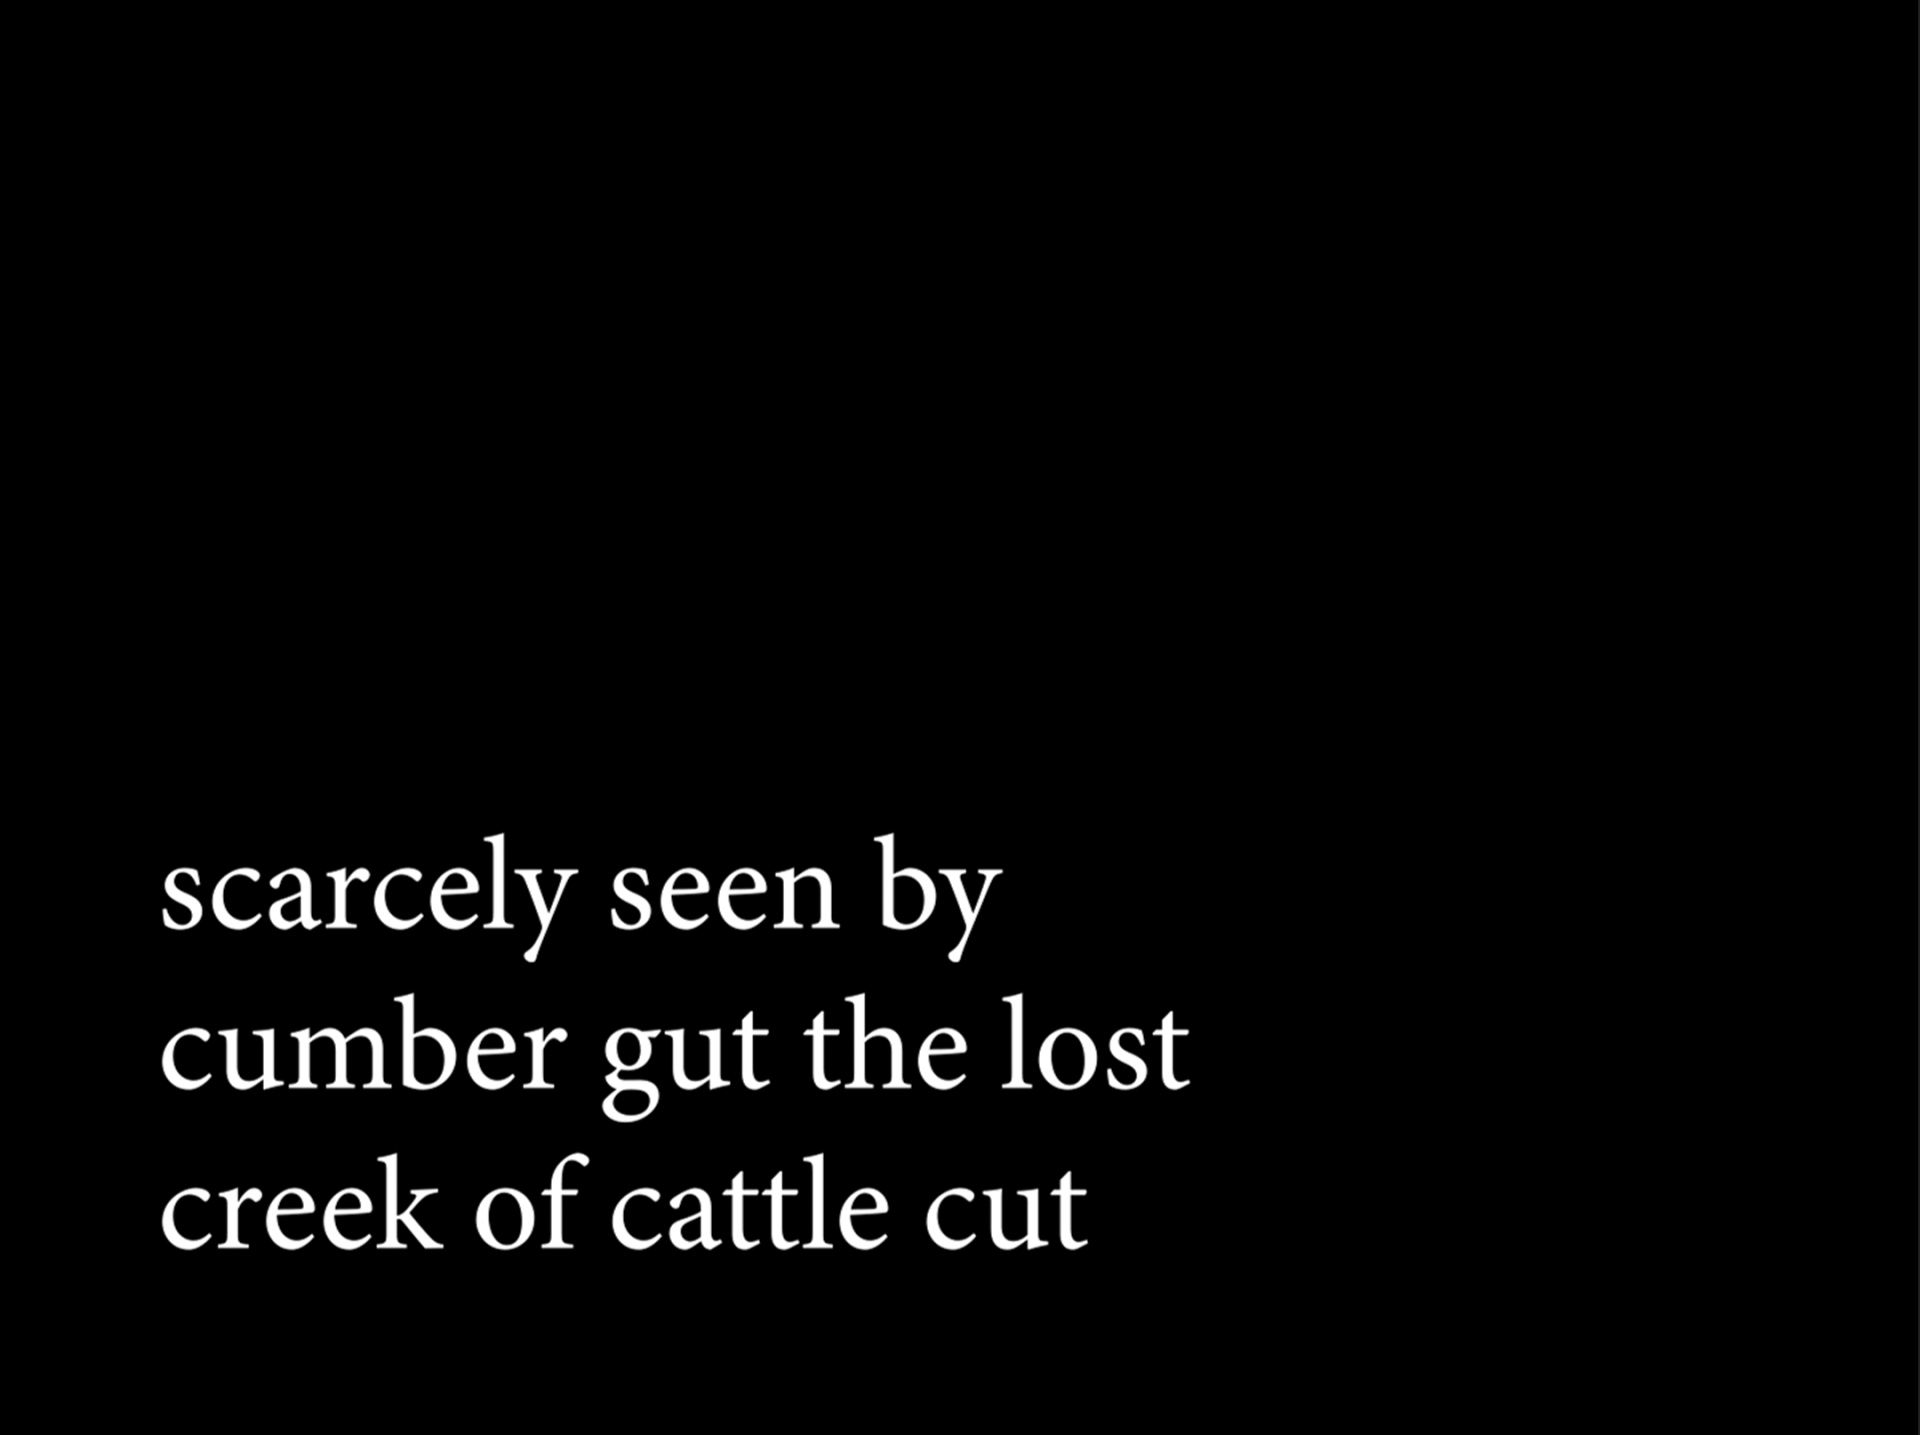 A video still of a black screen with white writing aligned to the bottom left of the frame that says "scarcely seen by cucumber gut the lost creek of cattle cut".